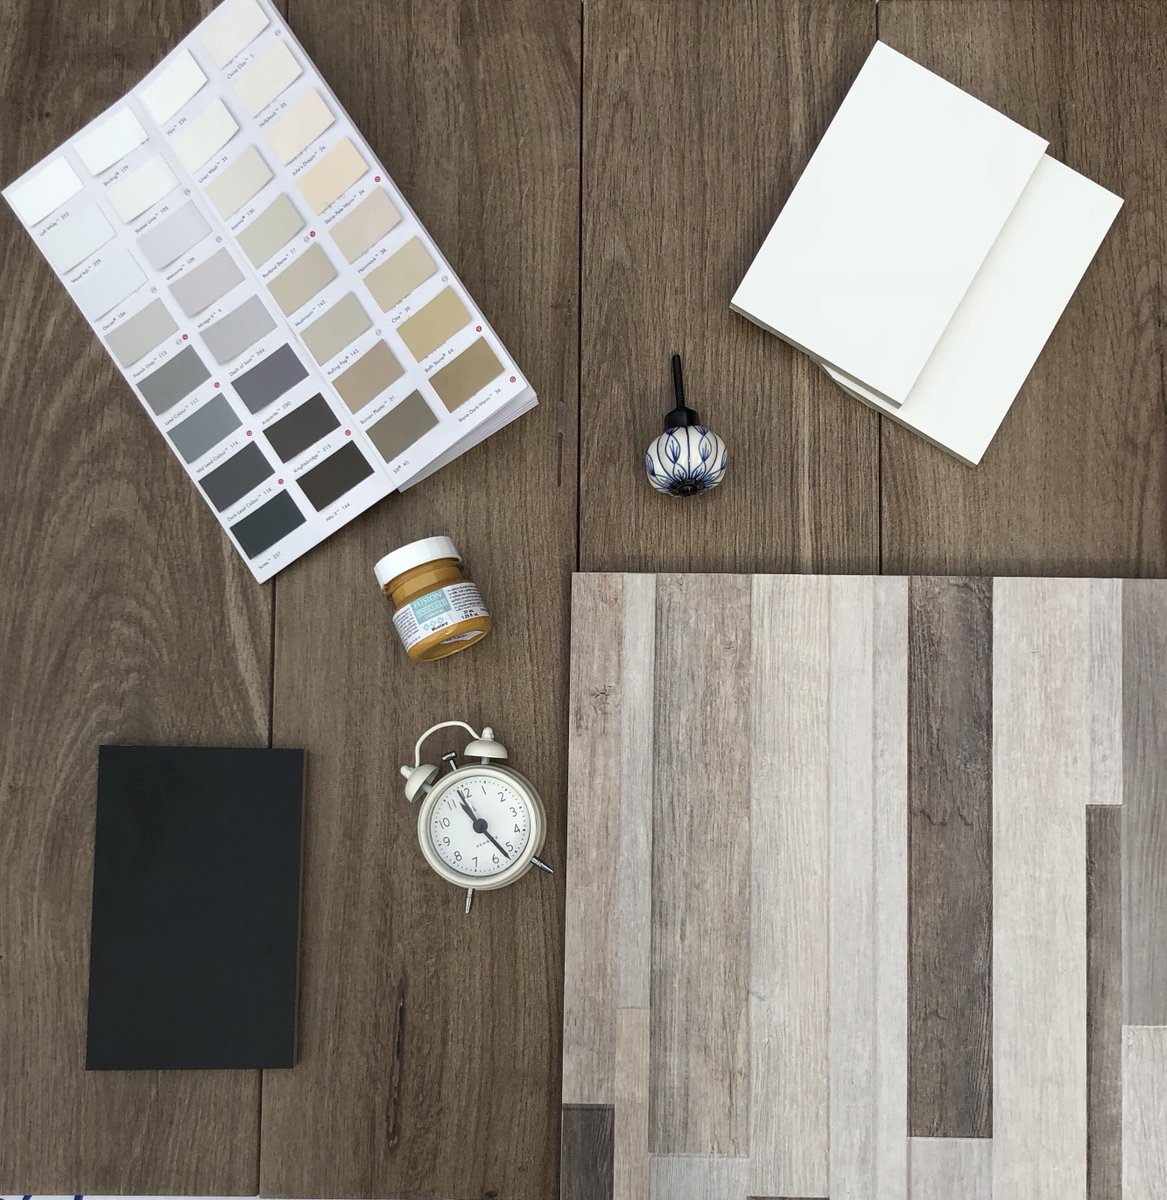 We’ve been playing around with a neutral colour scheme today, what do you think to our mood board?  #moodboard #tiles #new #woodtiles #splitface #palette #tilemoodboard #inspiration #kitchen #bathroom #interiors #interiordesign #tiling